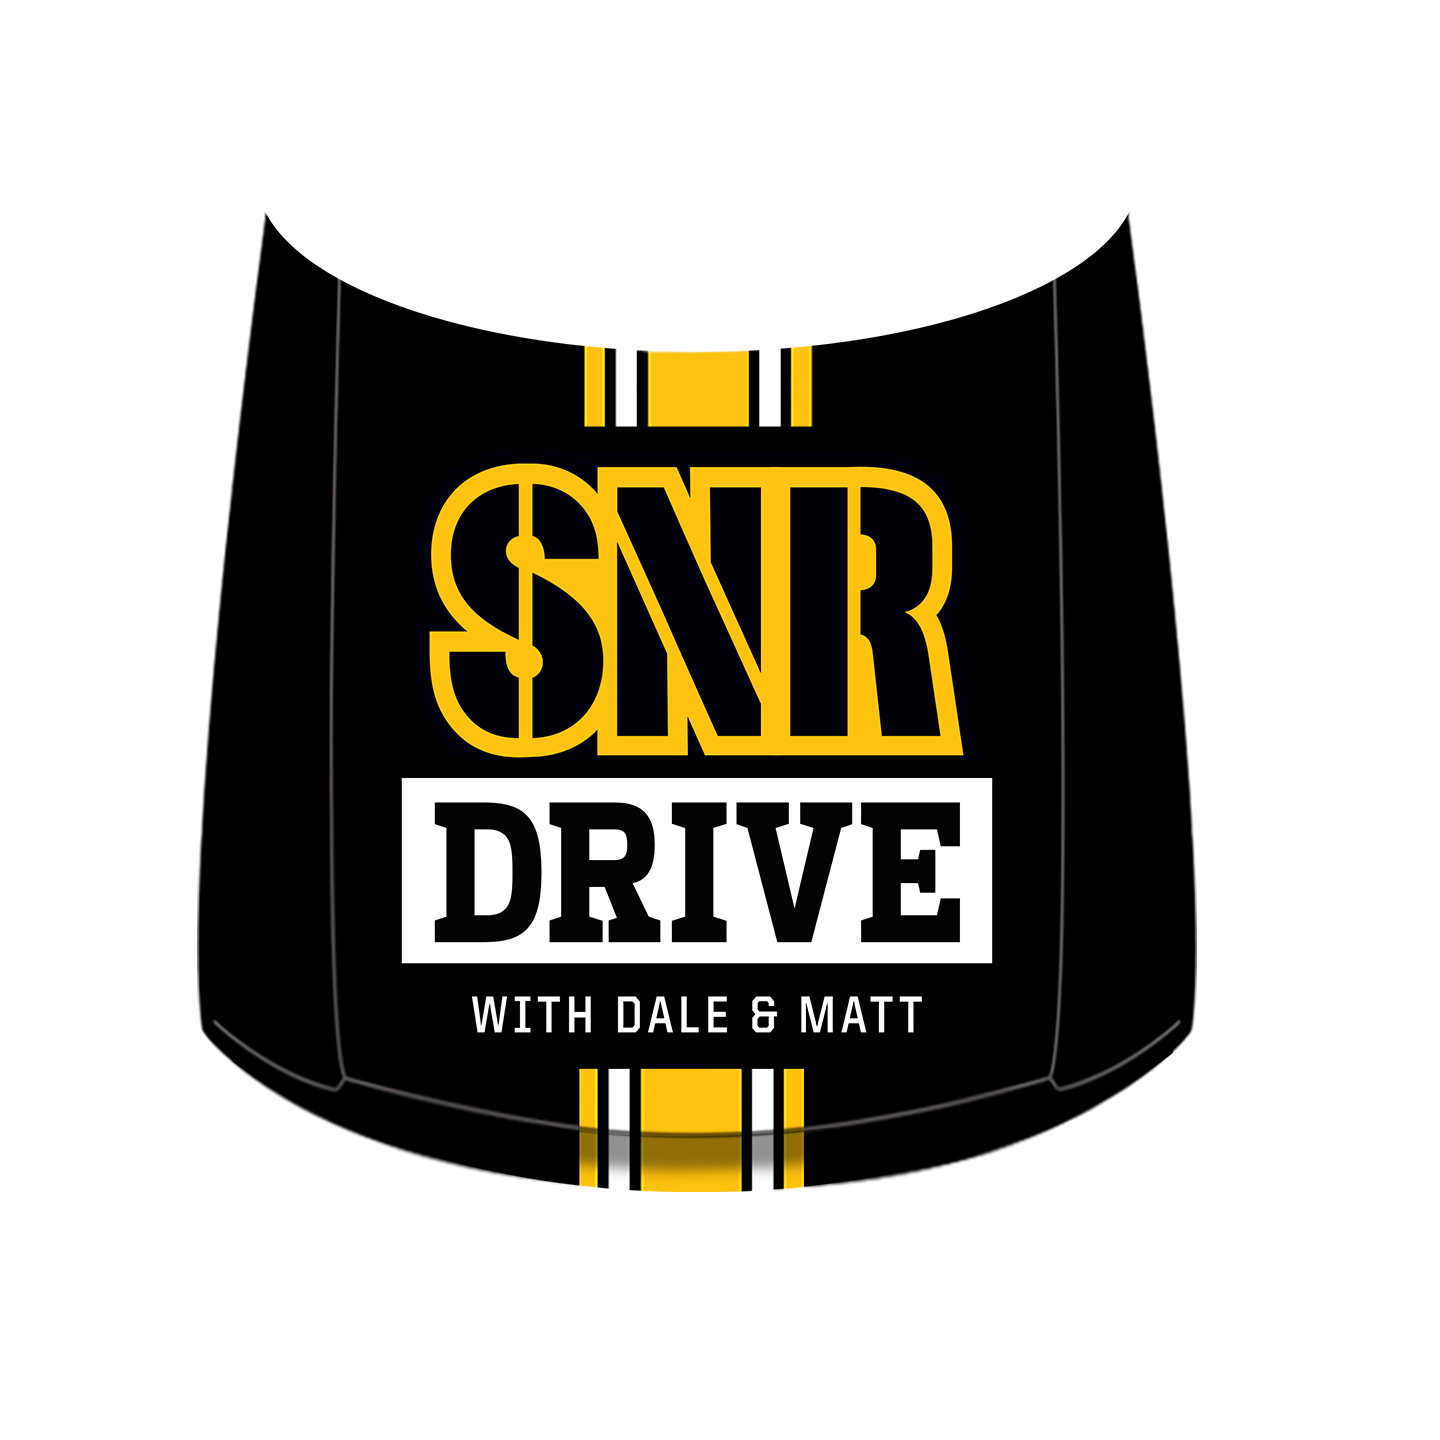 SNR Drive with Matt & Dale (Pittsburgh Steelers)